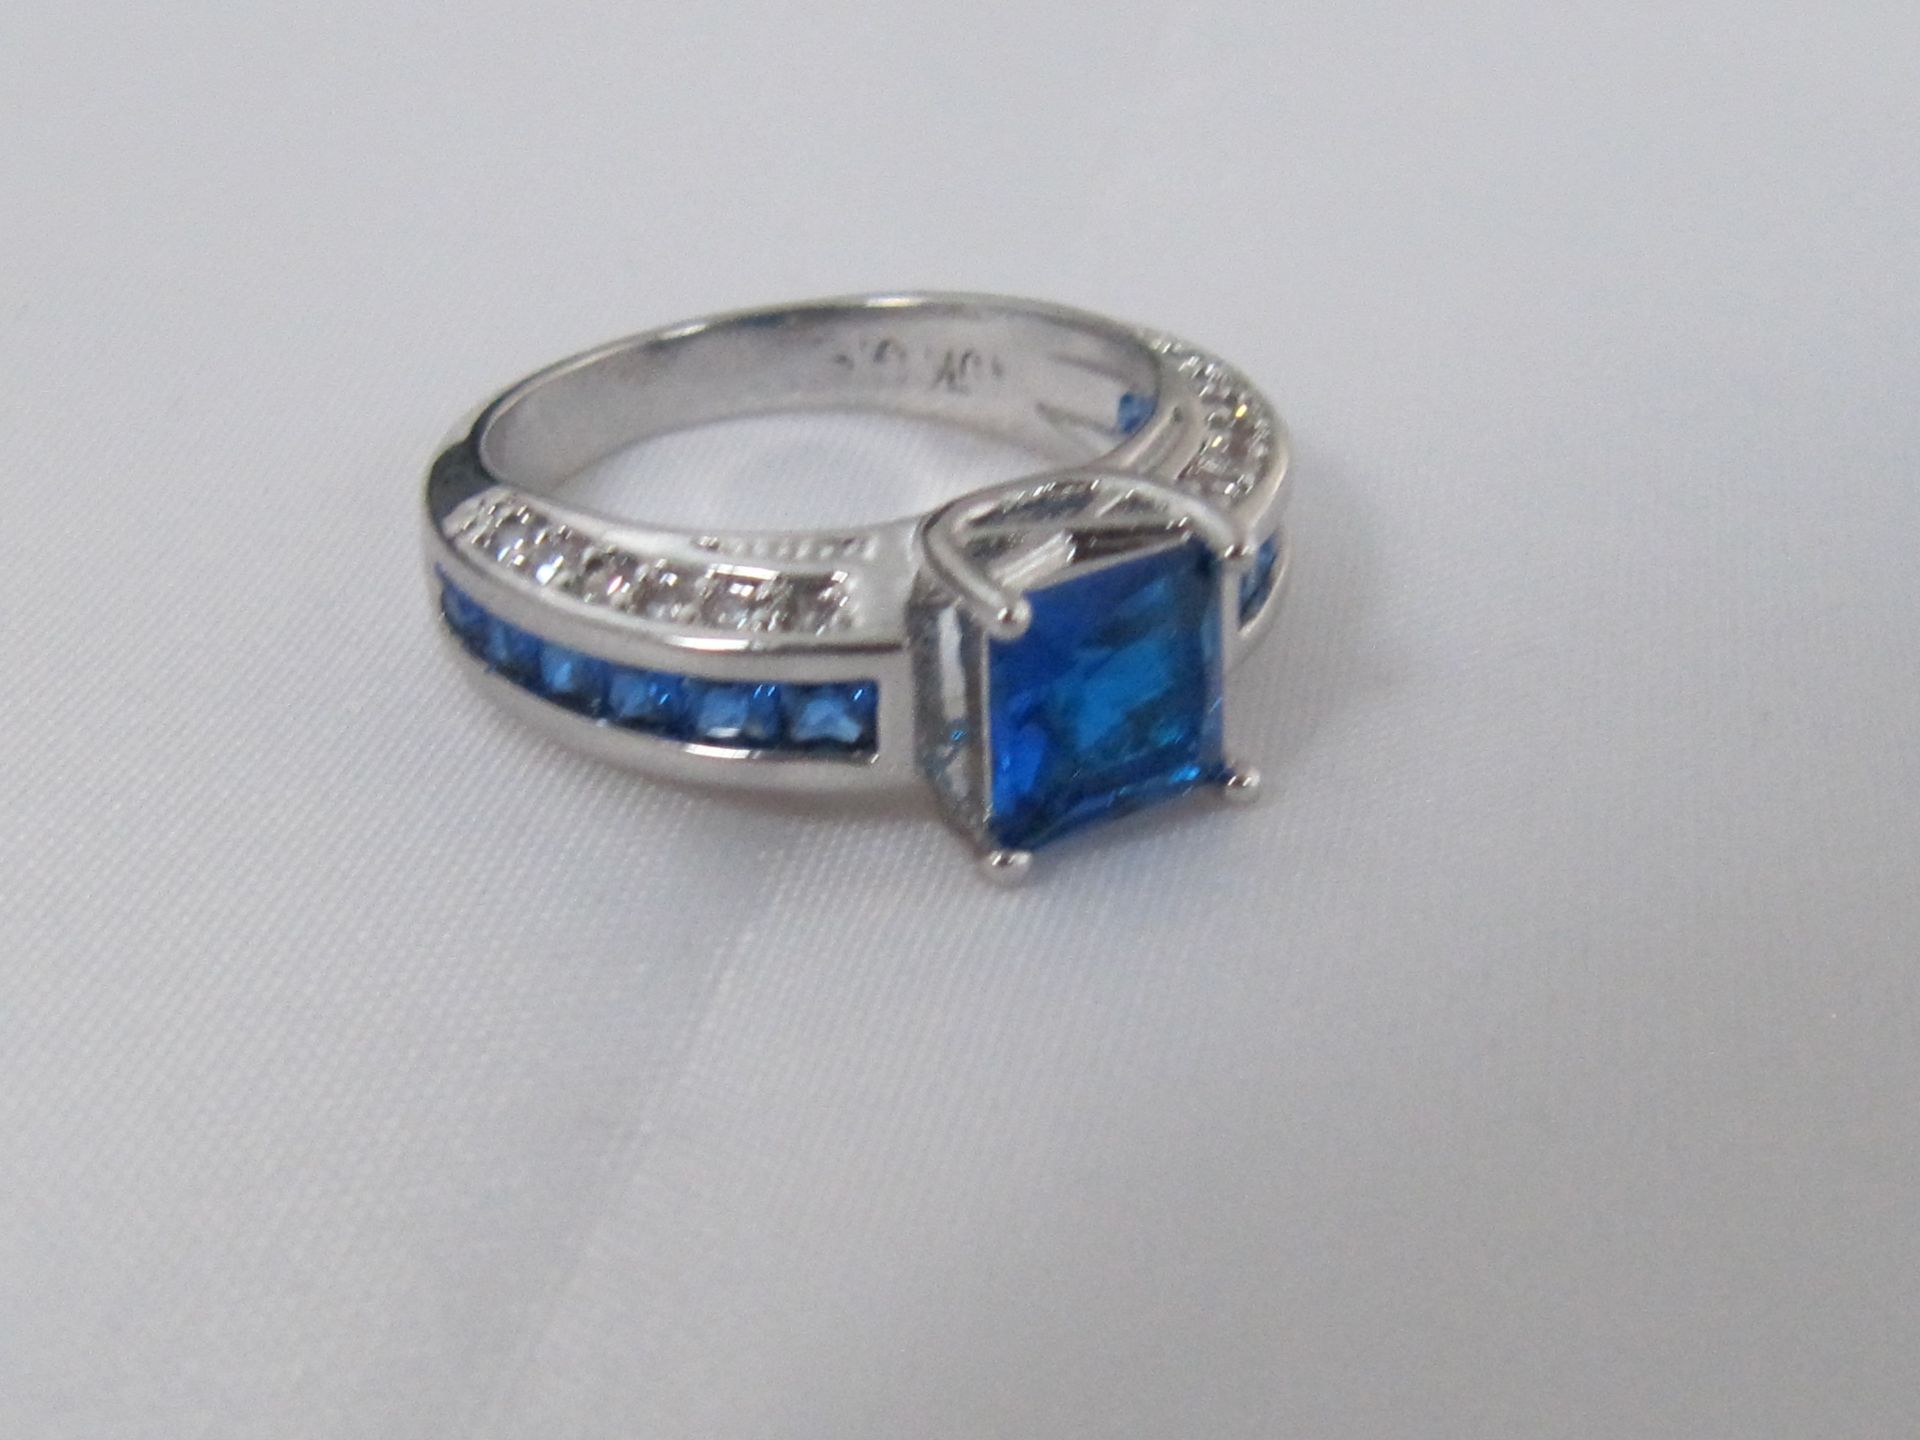 10k White Gold Filled with Blue Sapphires. Size M. - Image 5 of 5